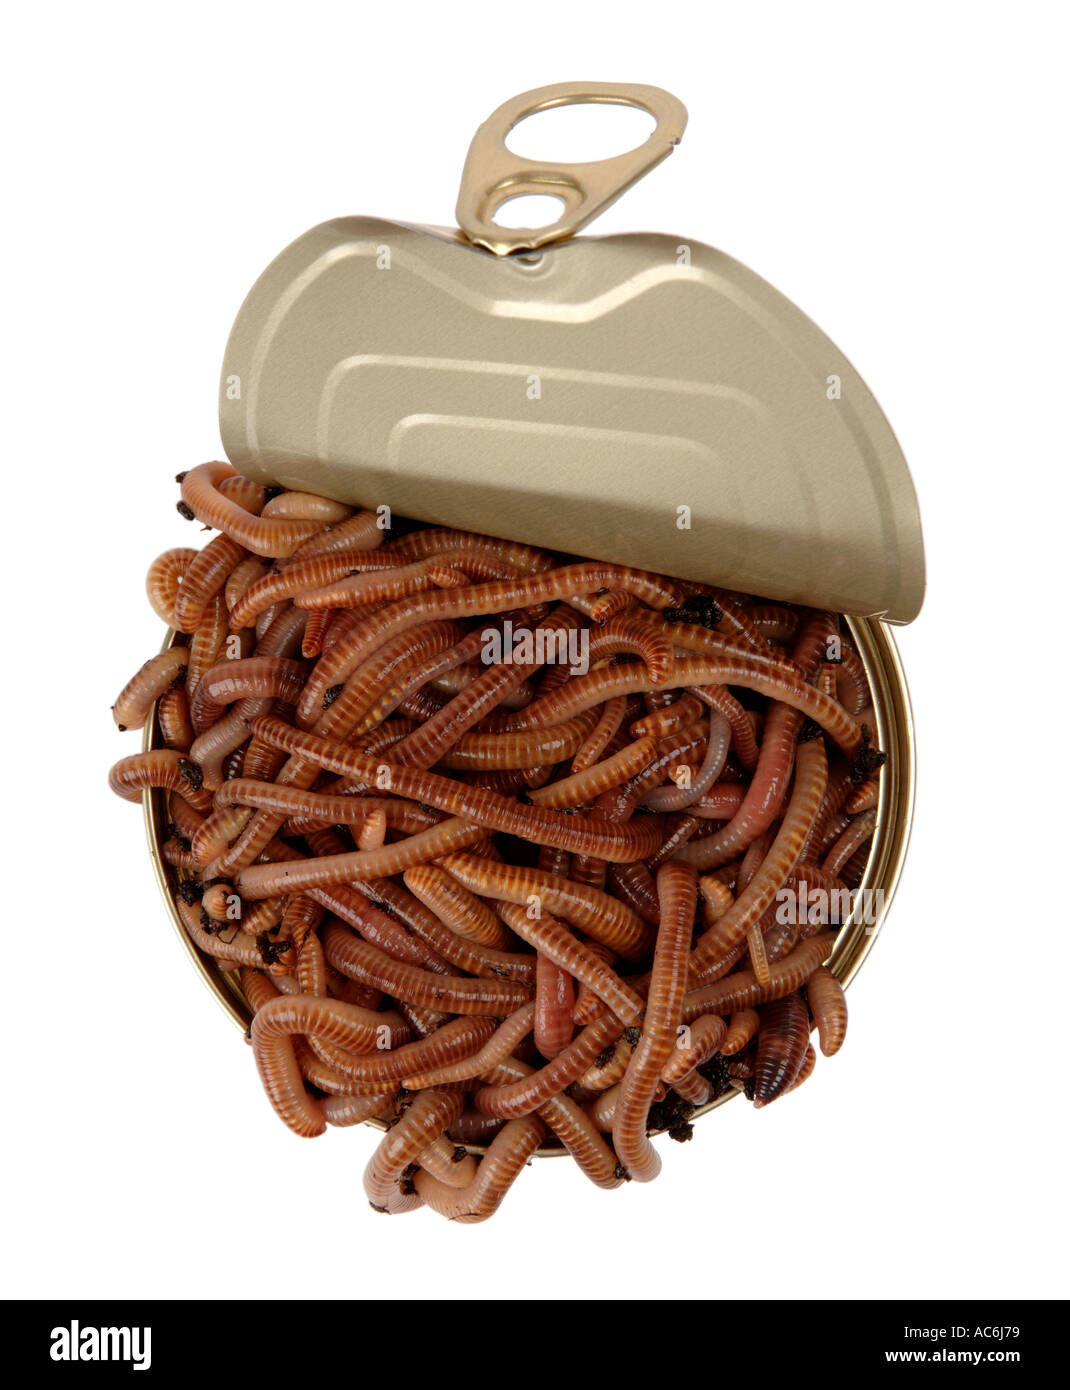 Open can of worms Stock Photo